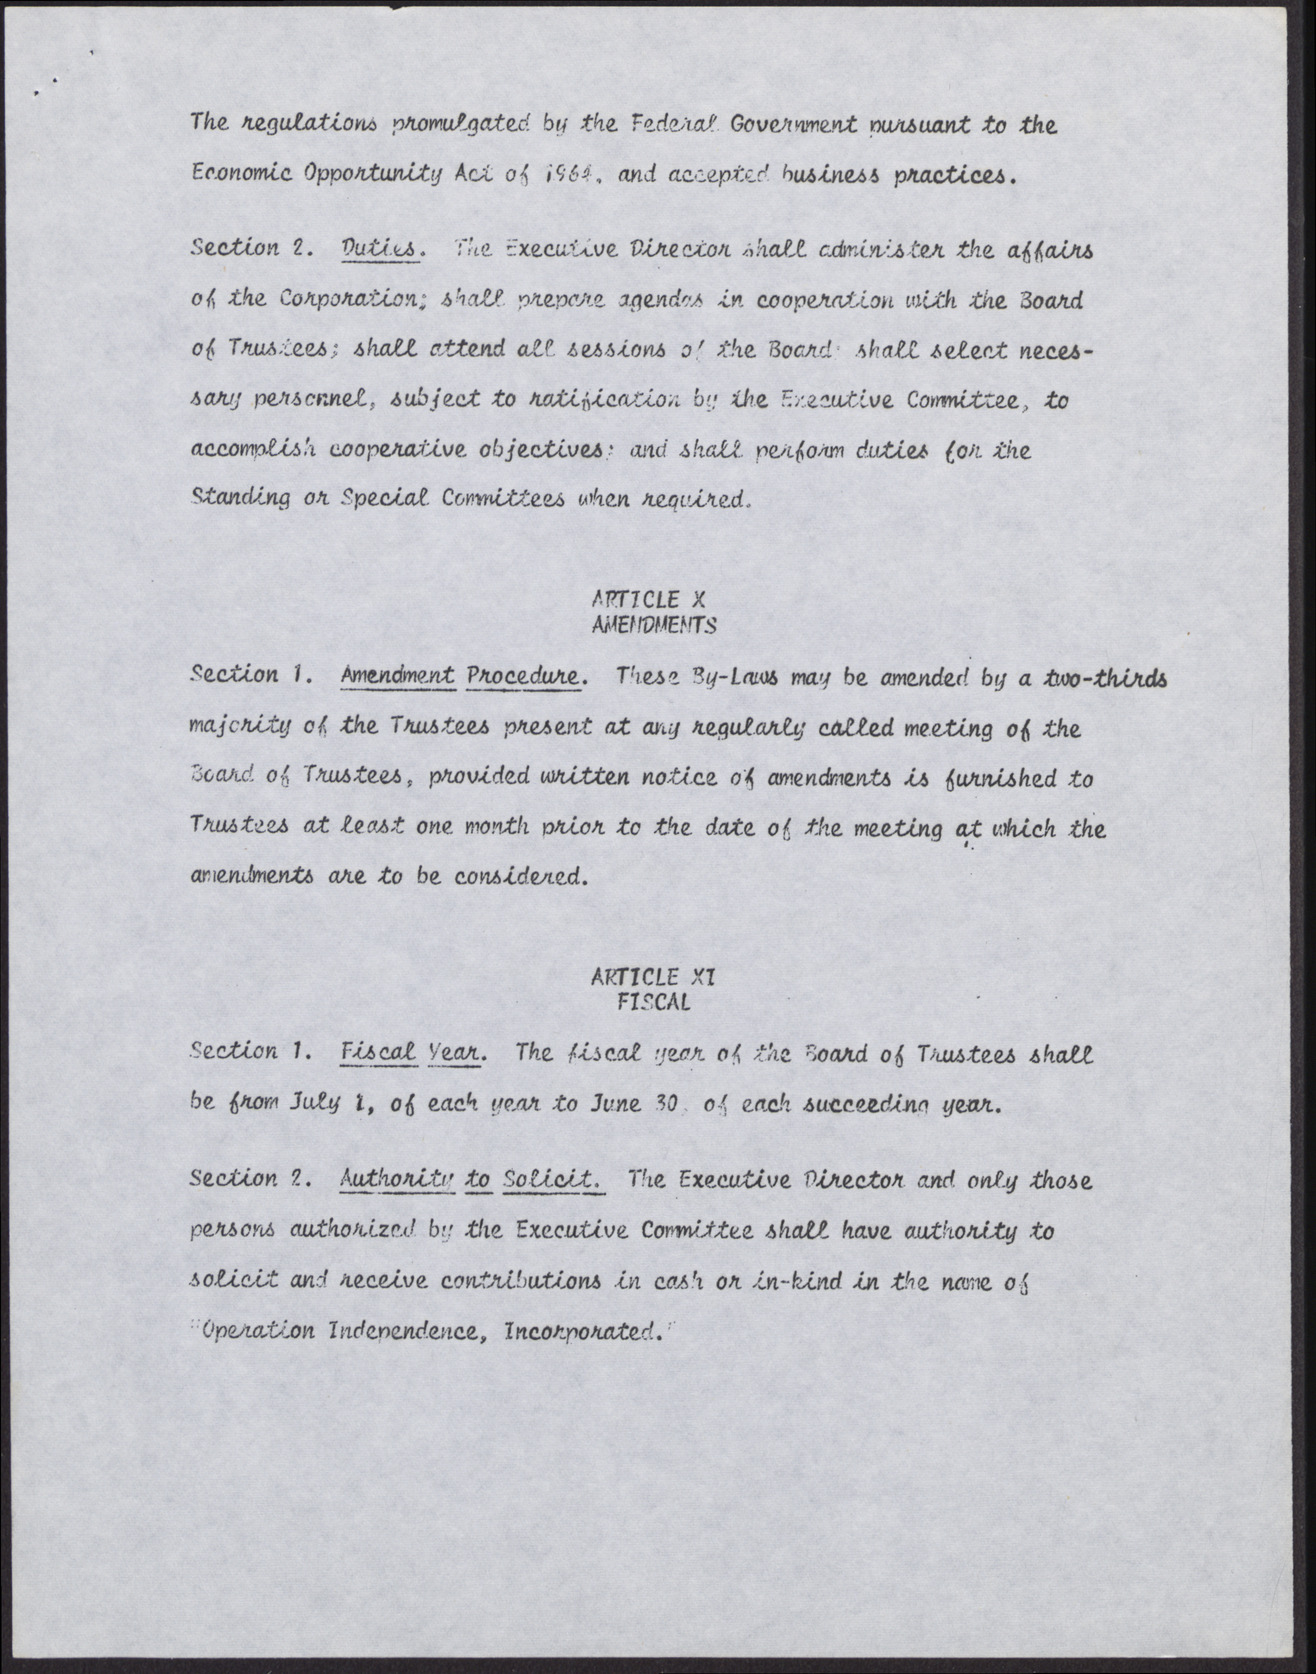 Operation Independence Incorporated Bylaws (9 pages), no date, page 8